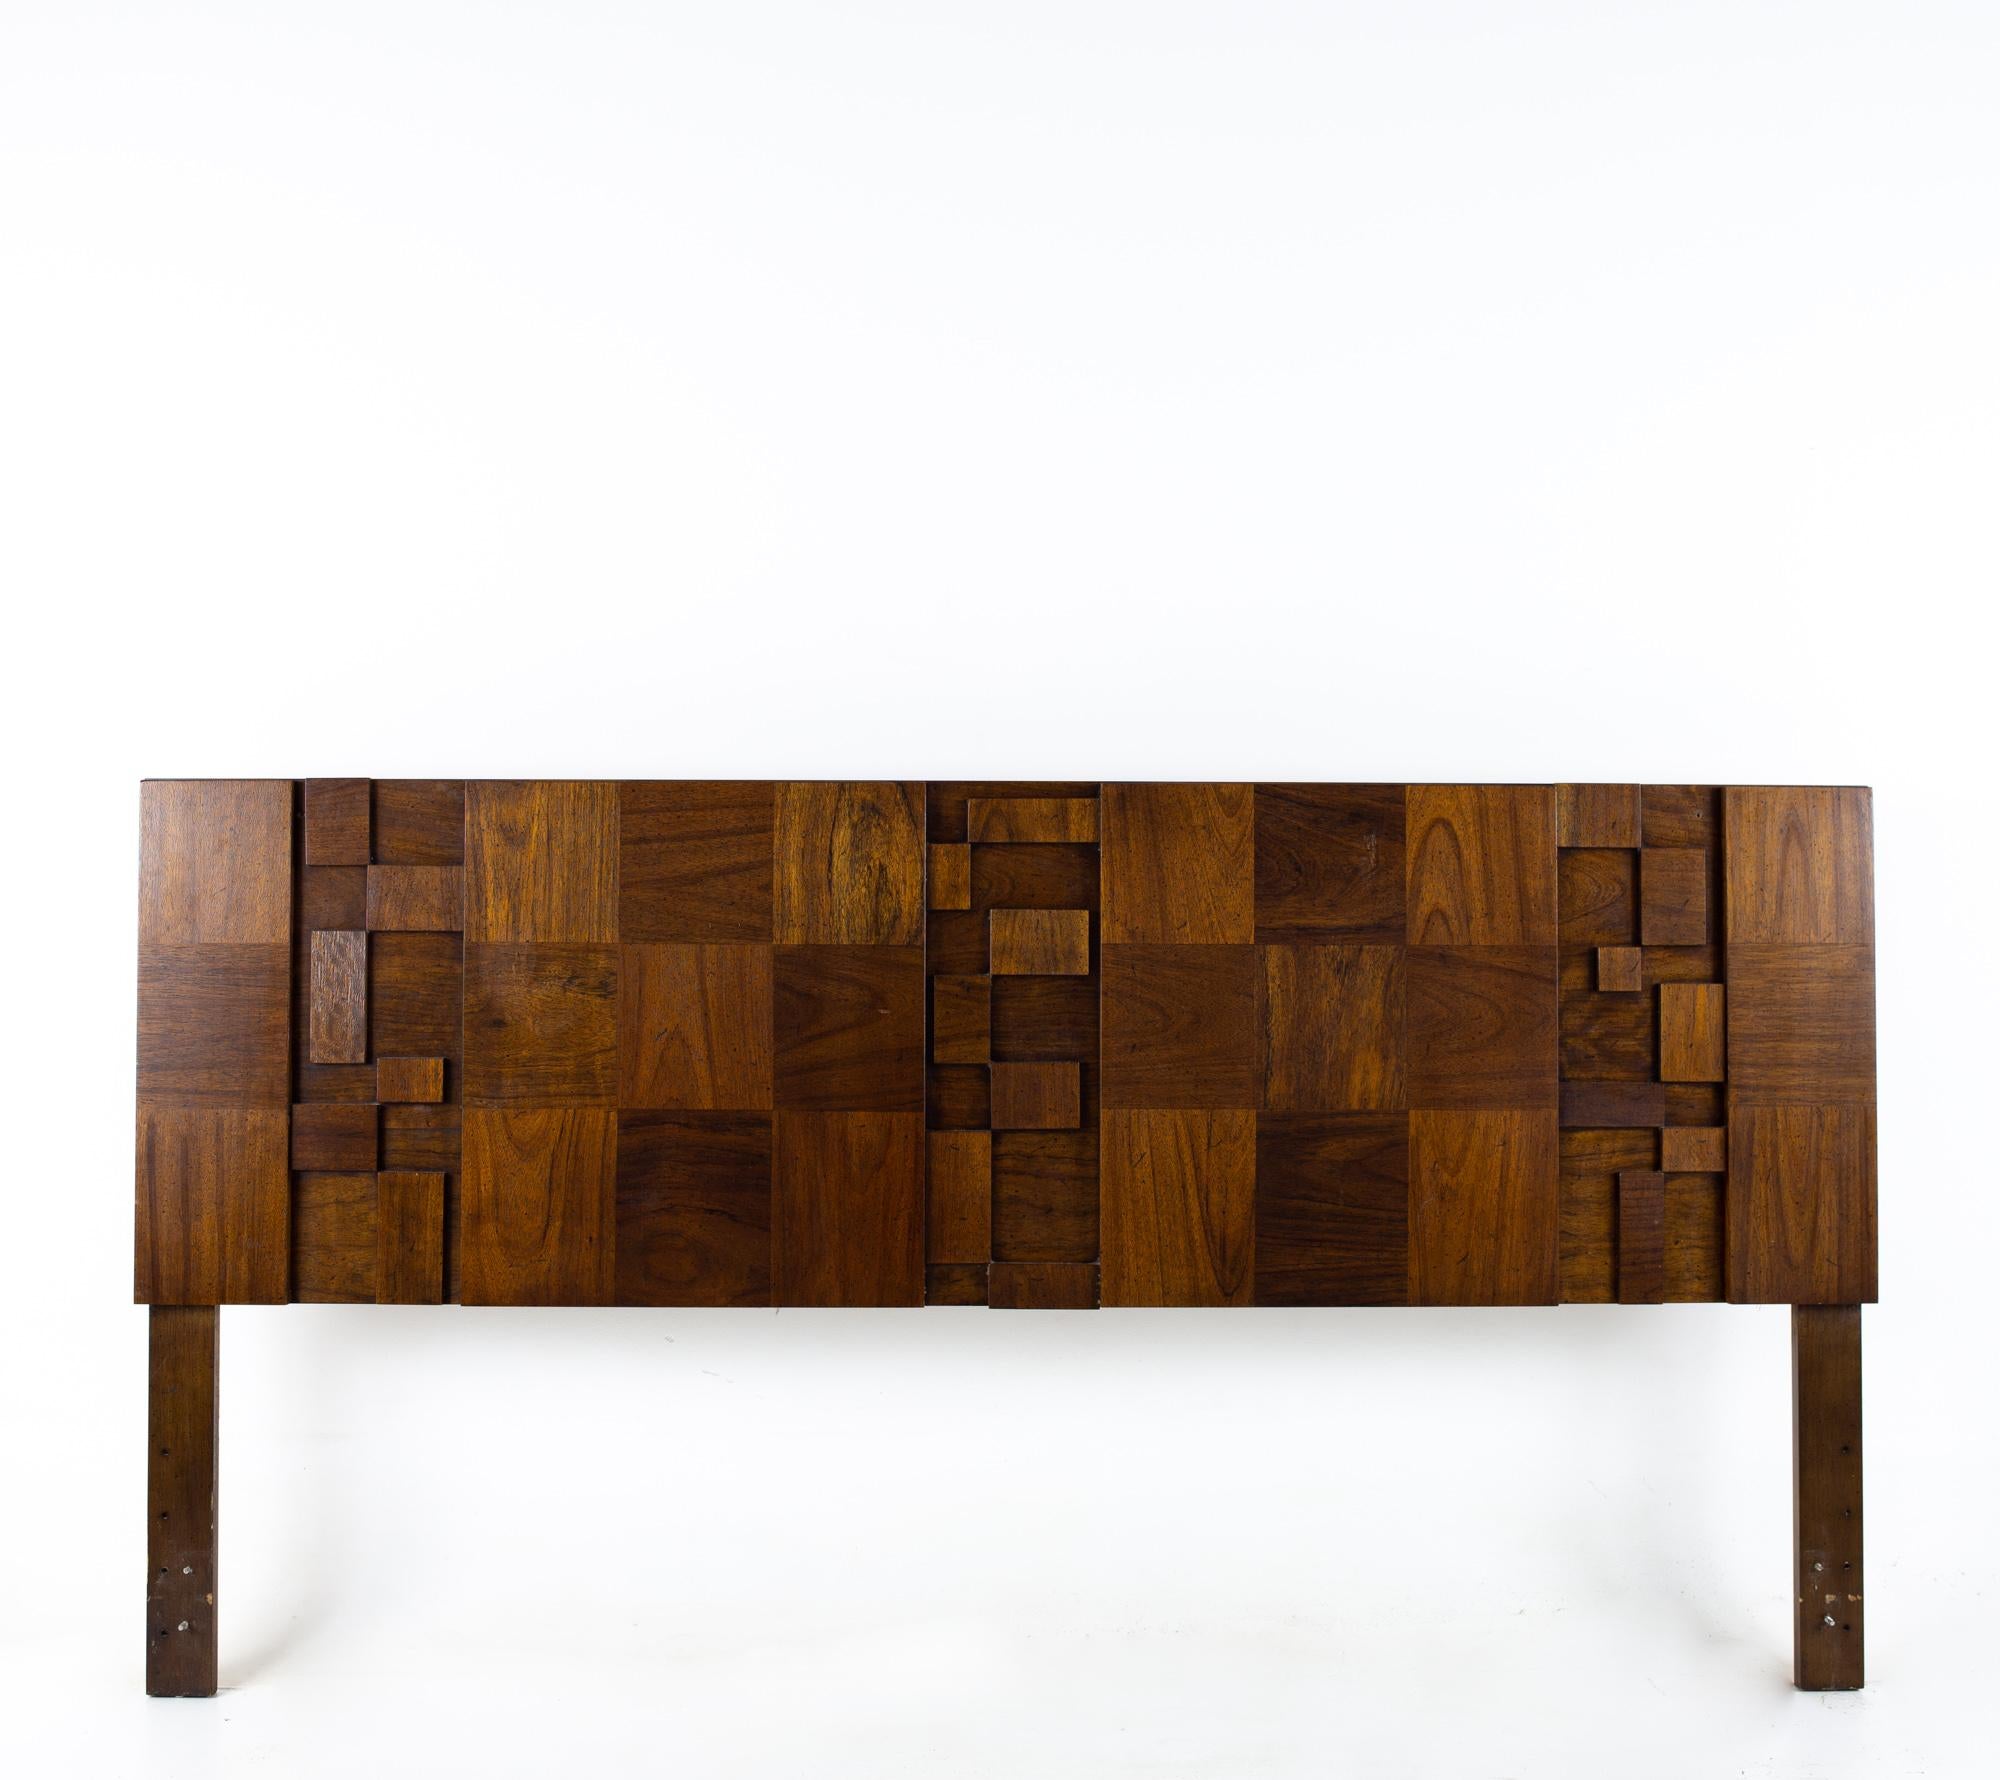 Lane staccato Brutalist mid century walnut king headboard
Headboard measures: 80 wide x 1.5 deep x 42 inches high 

All pieces of furniture can be had in what we call restored vintage condition. That means the piece is restored upon purchase so